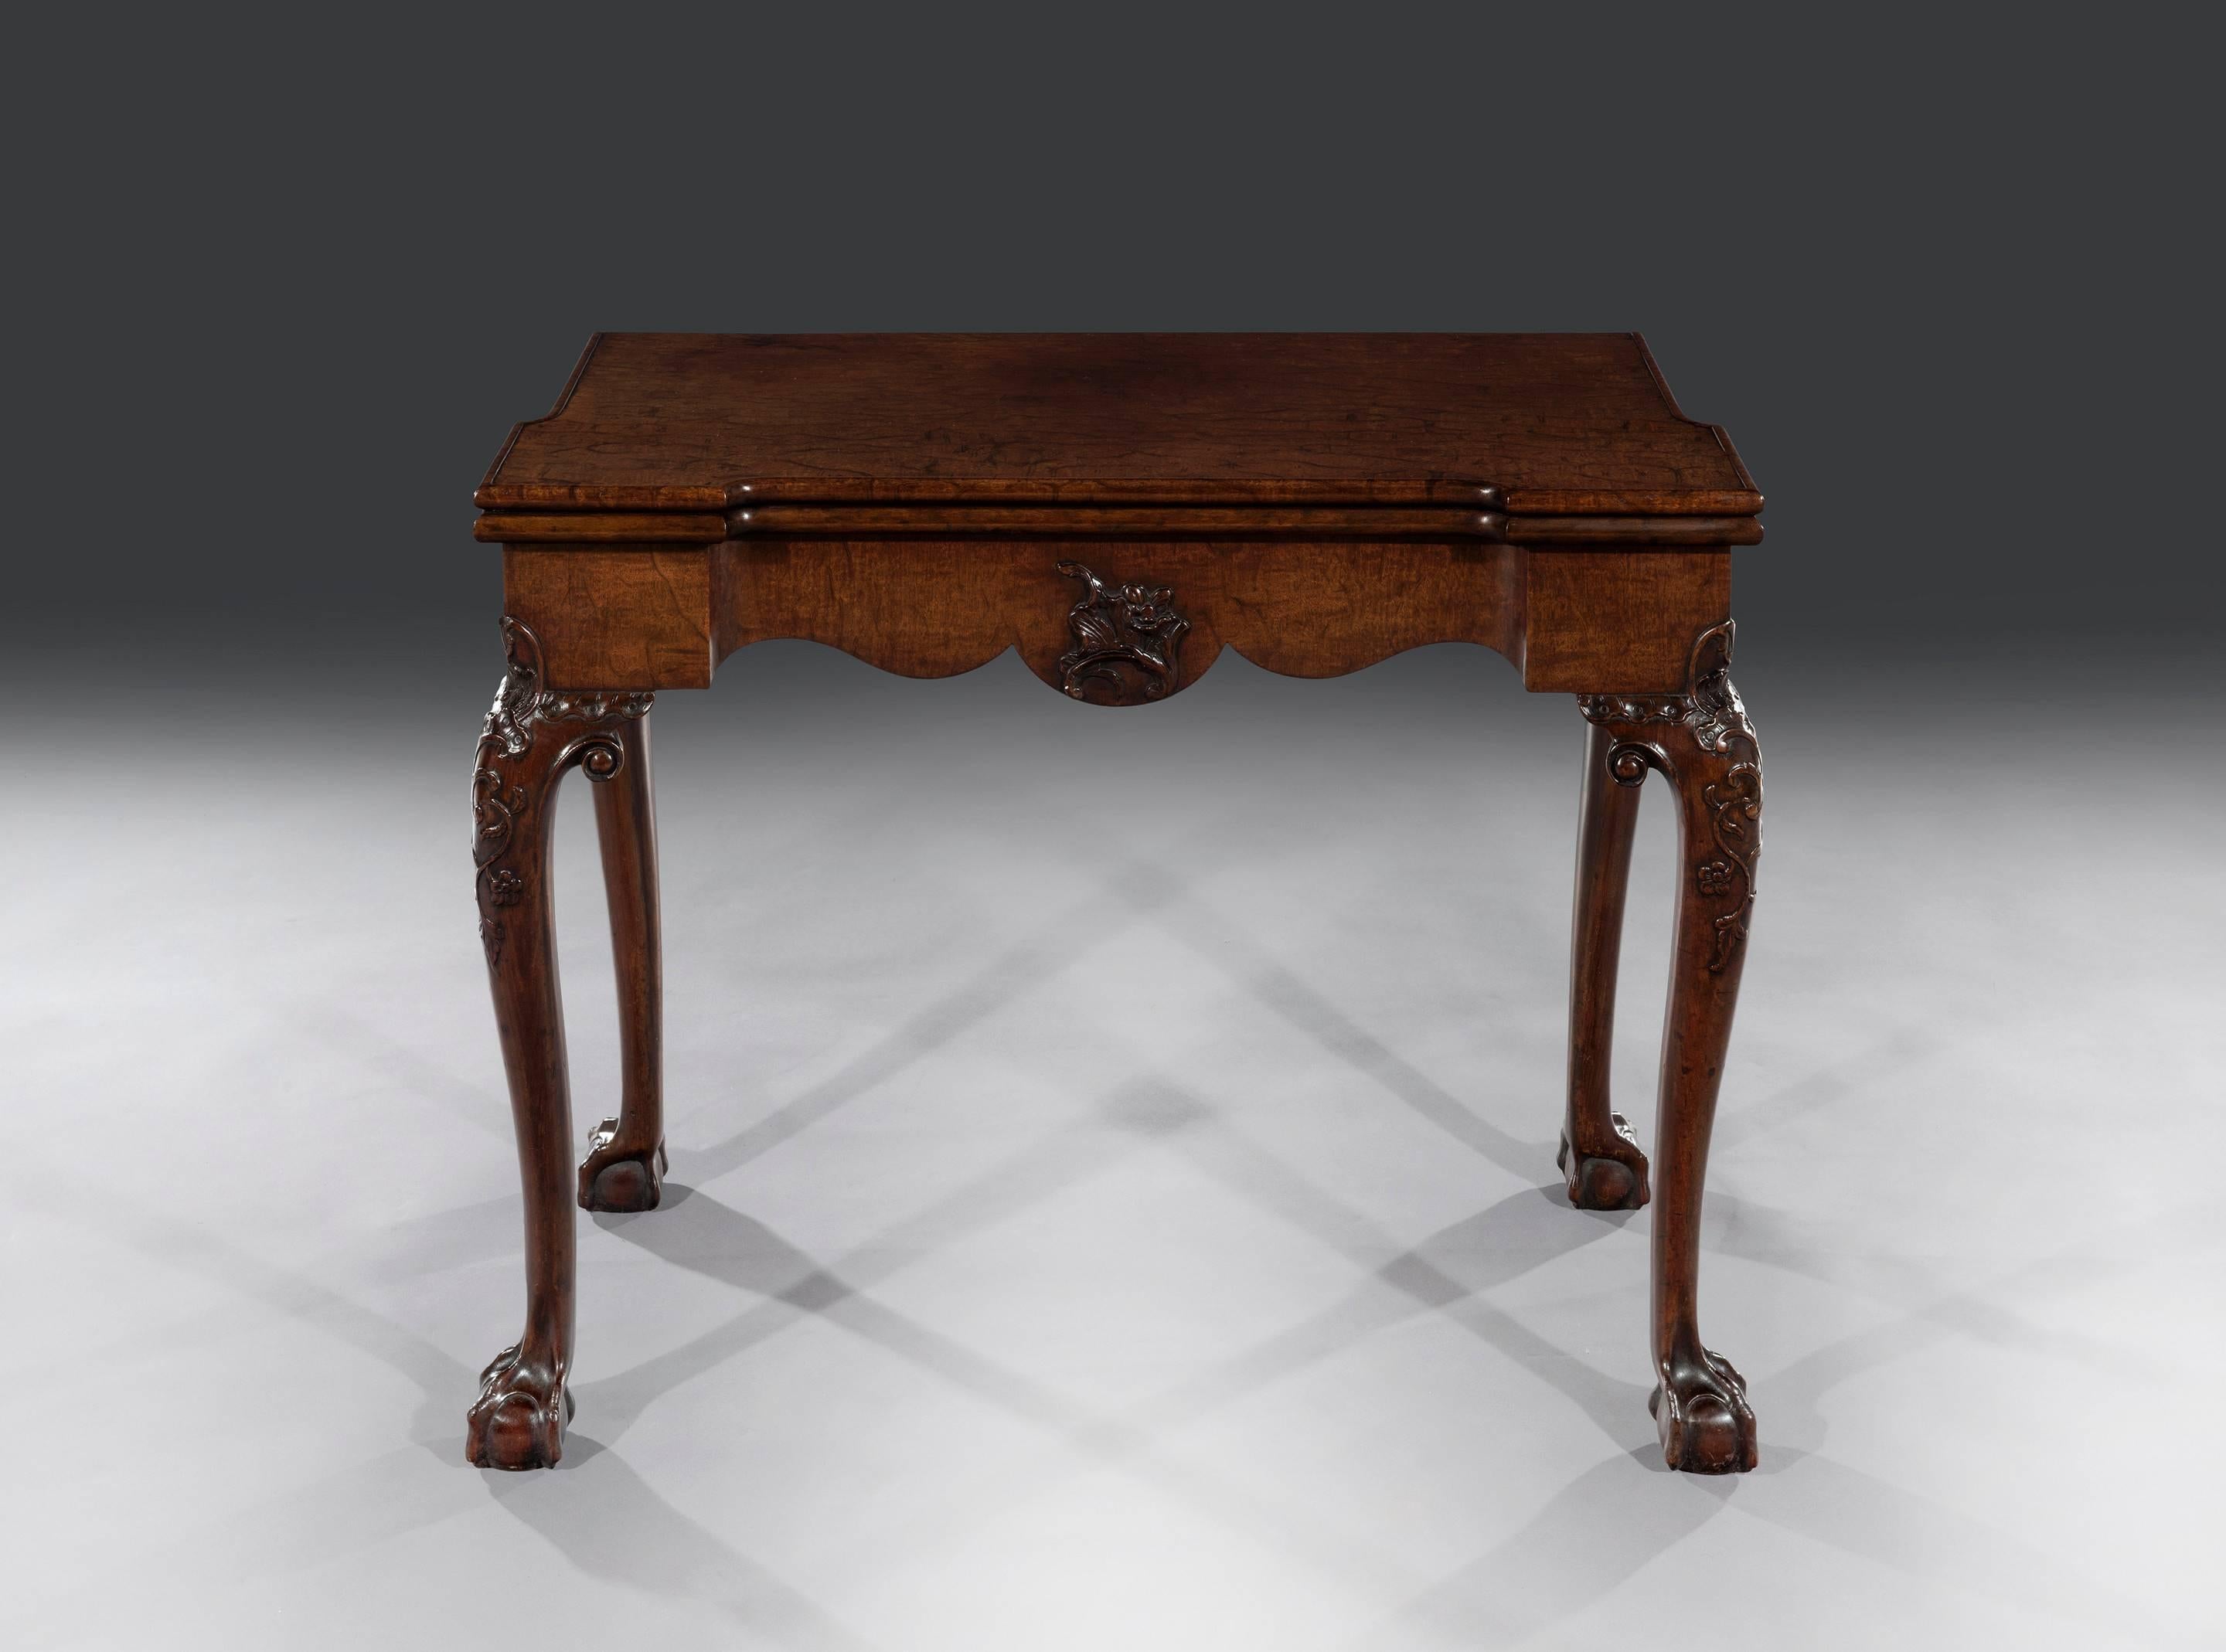 An exceptional Chippendale period mahogany and Amarillo card table of excellent colour, veneers and some original patination and finish. The solid quilted mahogany 